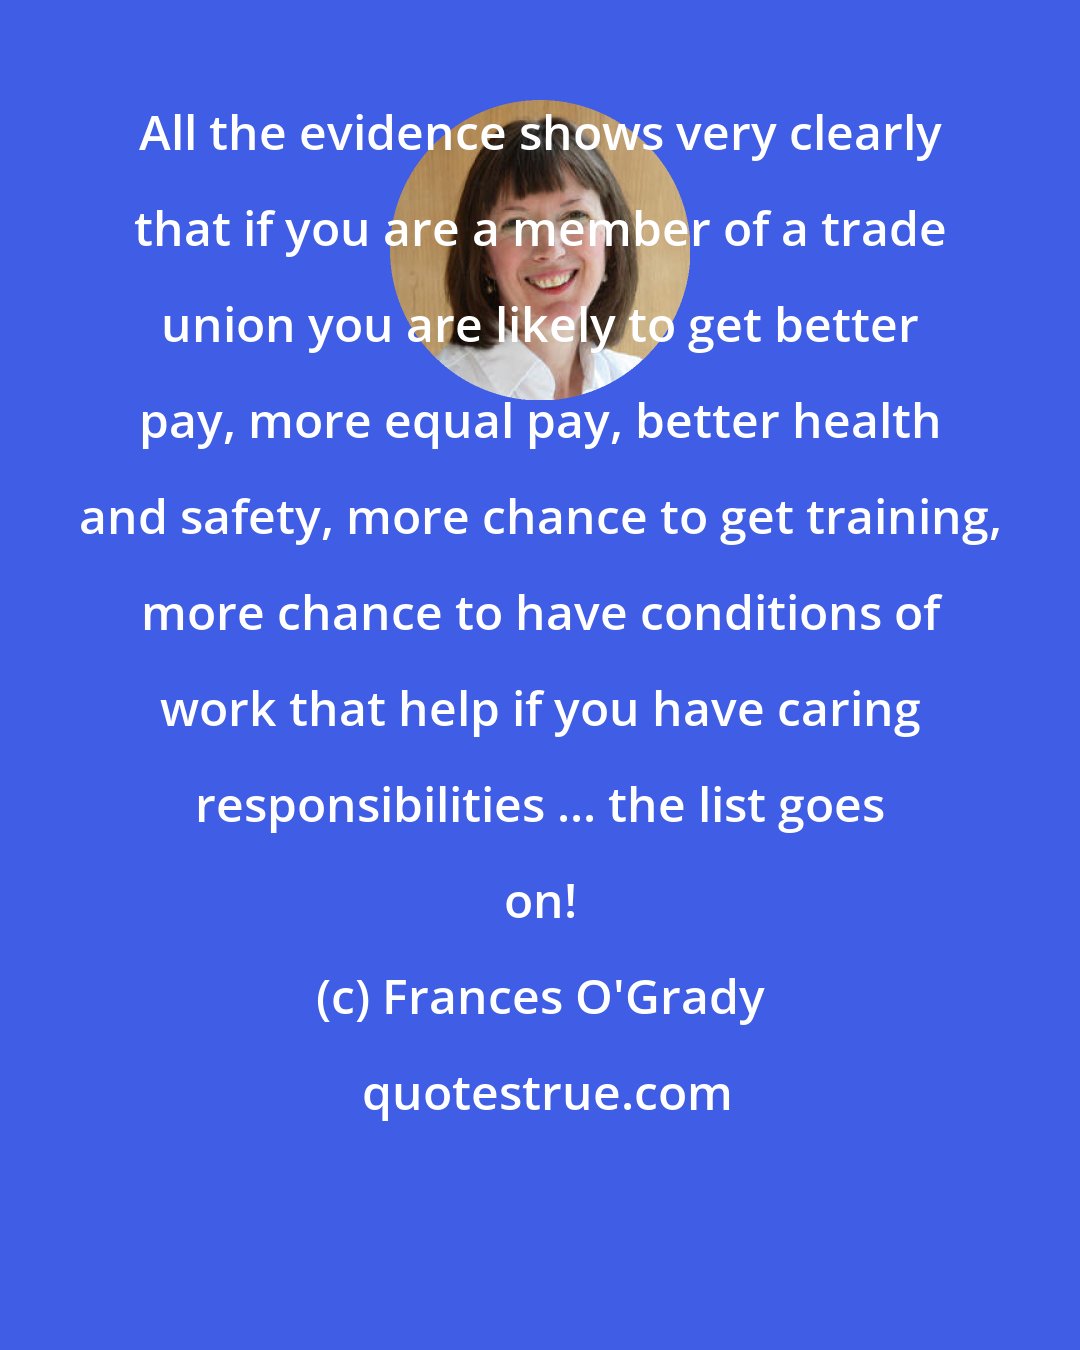 Frances O'Grady: All the evidence shows very clearly that if you are a member of a trade union you are likely to get better pay, more equal pay, better health and safety, more chance to get training, more chance to have conditions of work that help if you have caring responsibilities ... the list goes on!